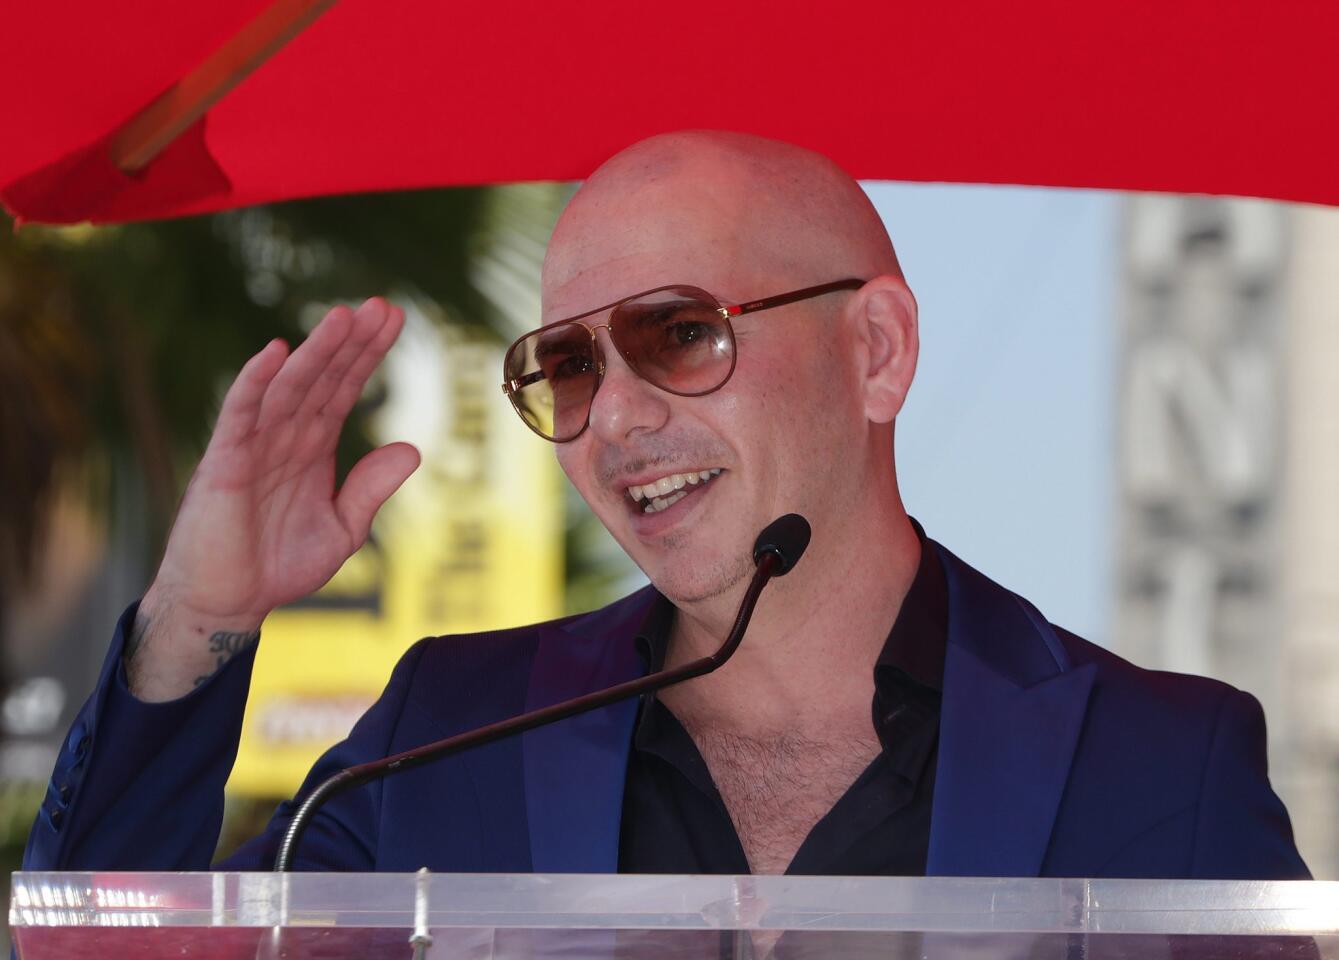 Pitbull receives star on Hollywood Walk of Fame